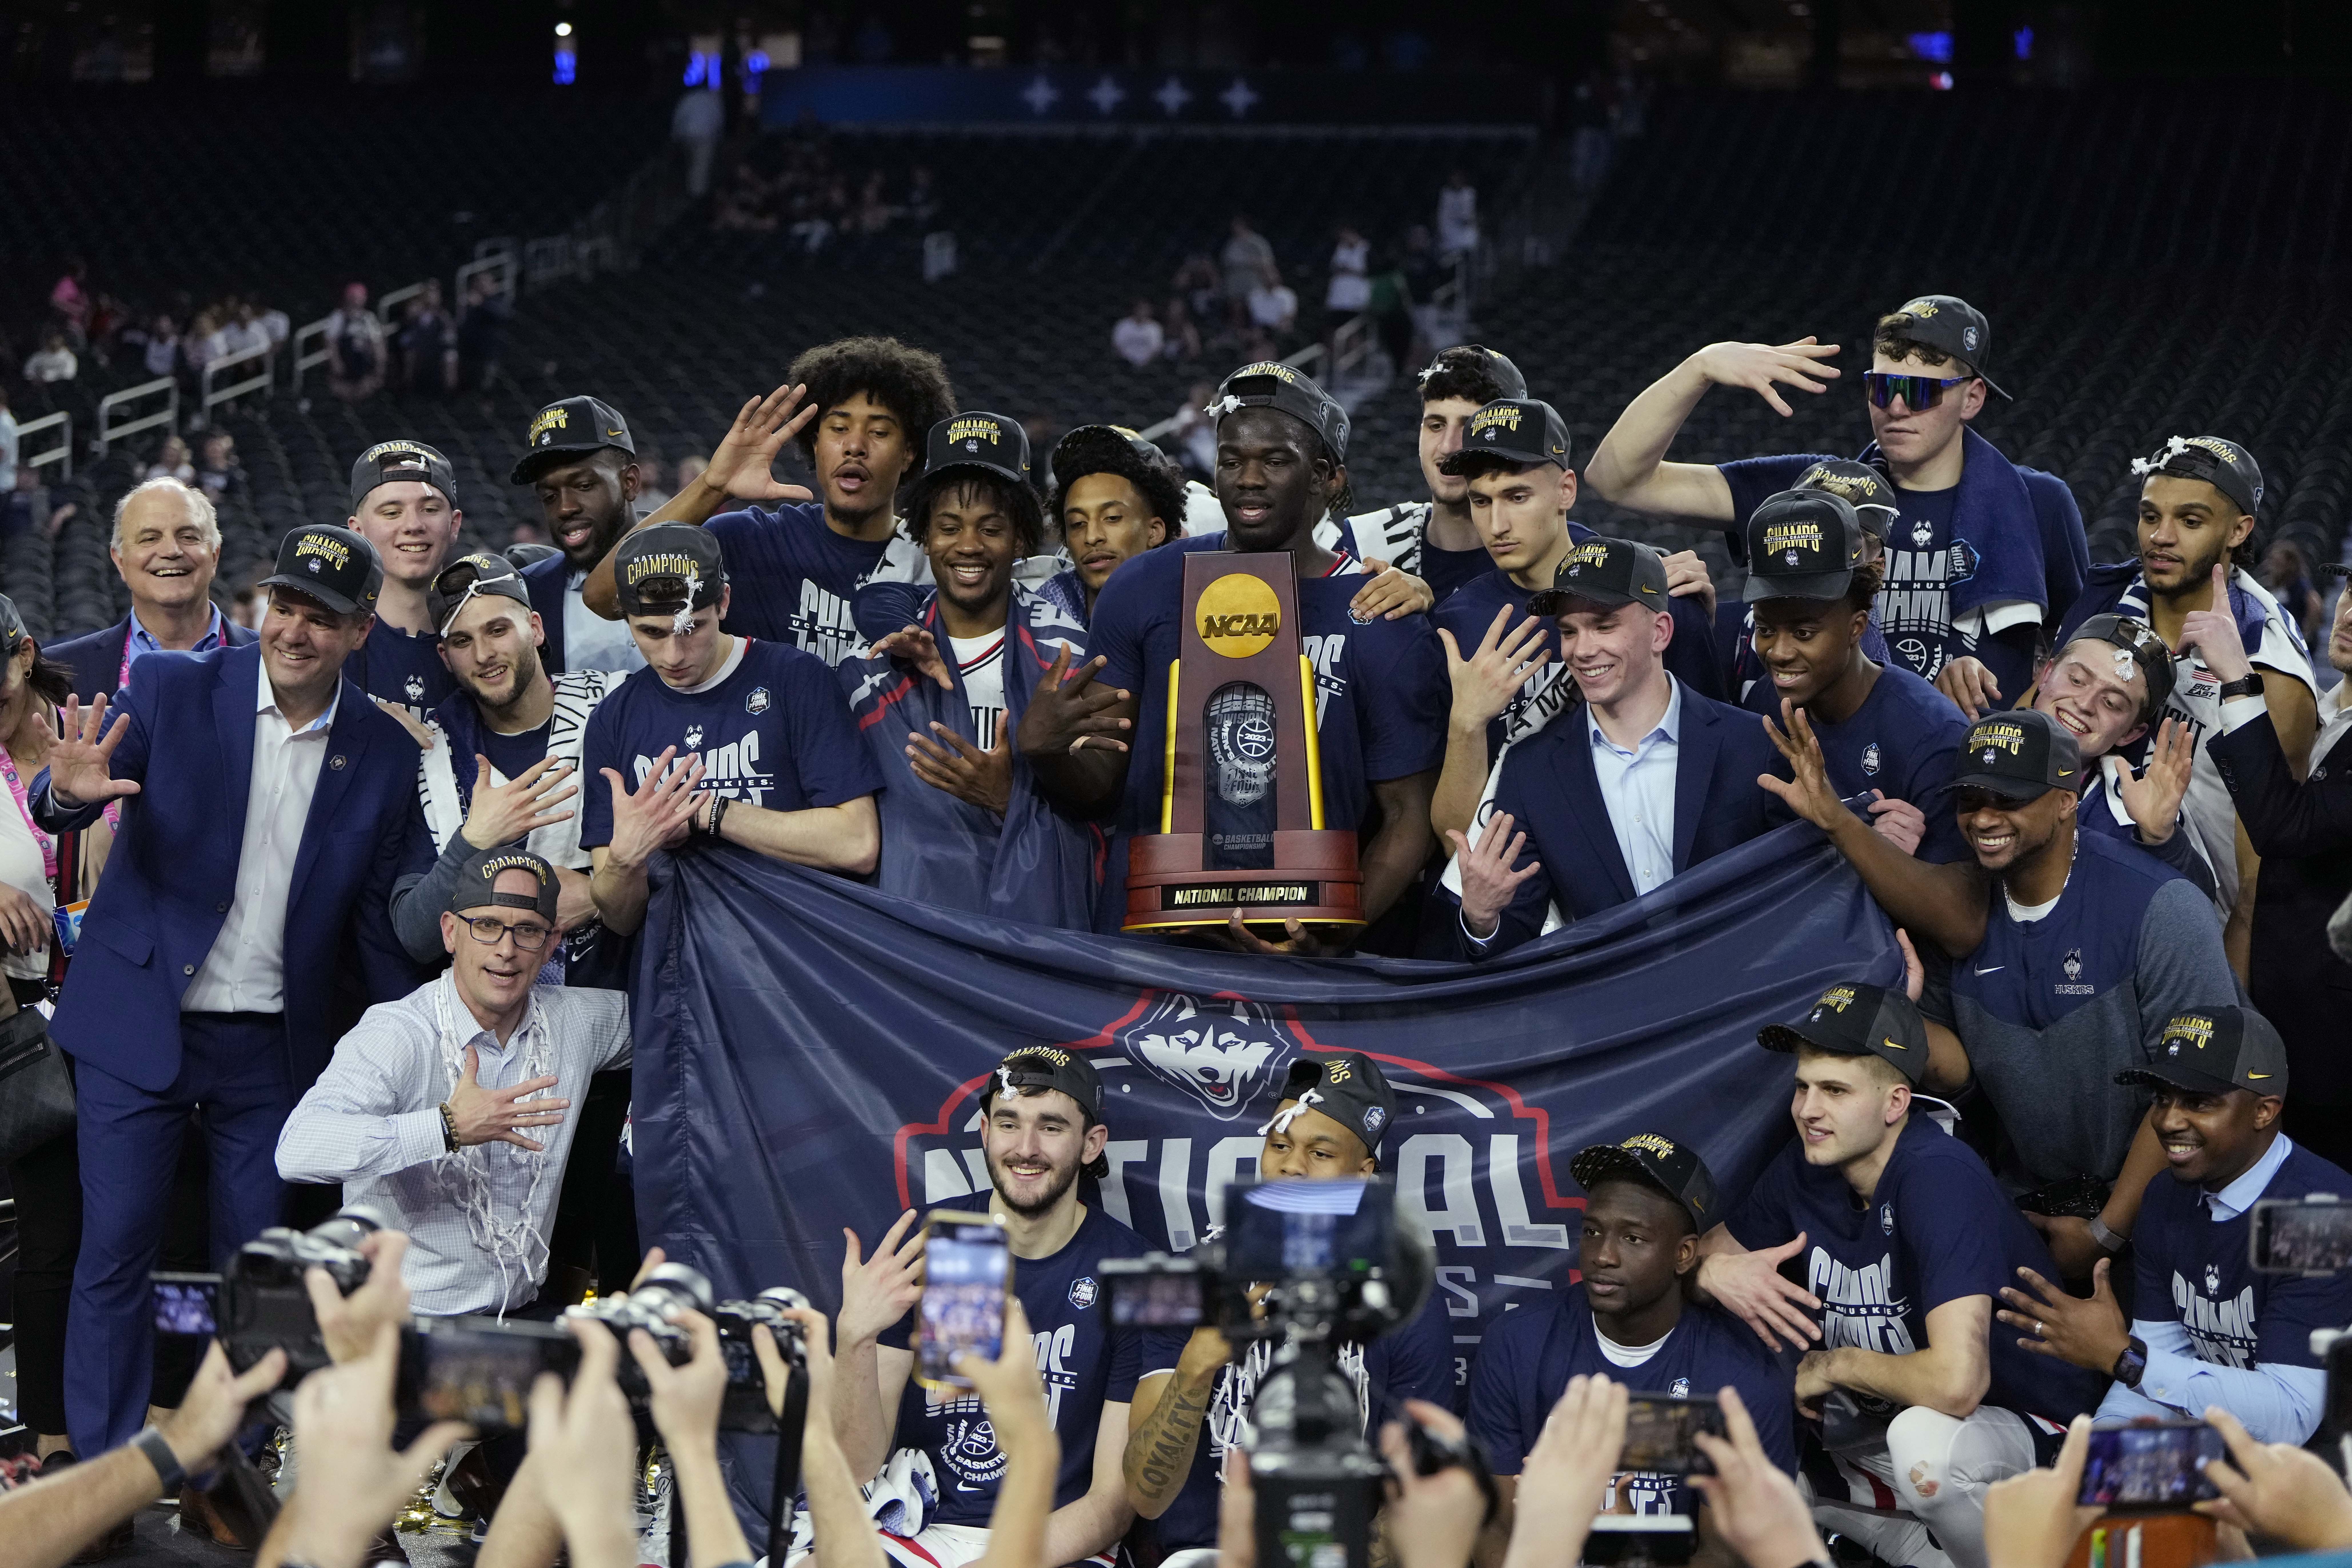 HUSKIES ON TOP: Twitter reacts to UConn’s fifth national championship win